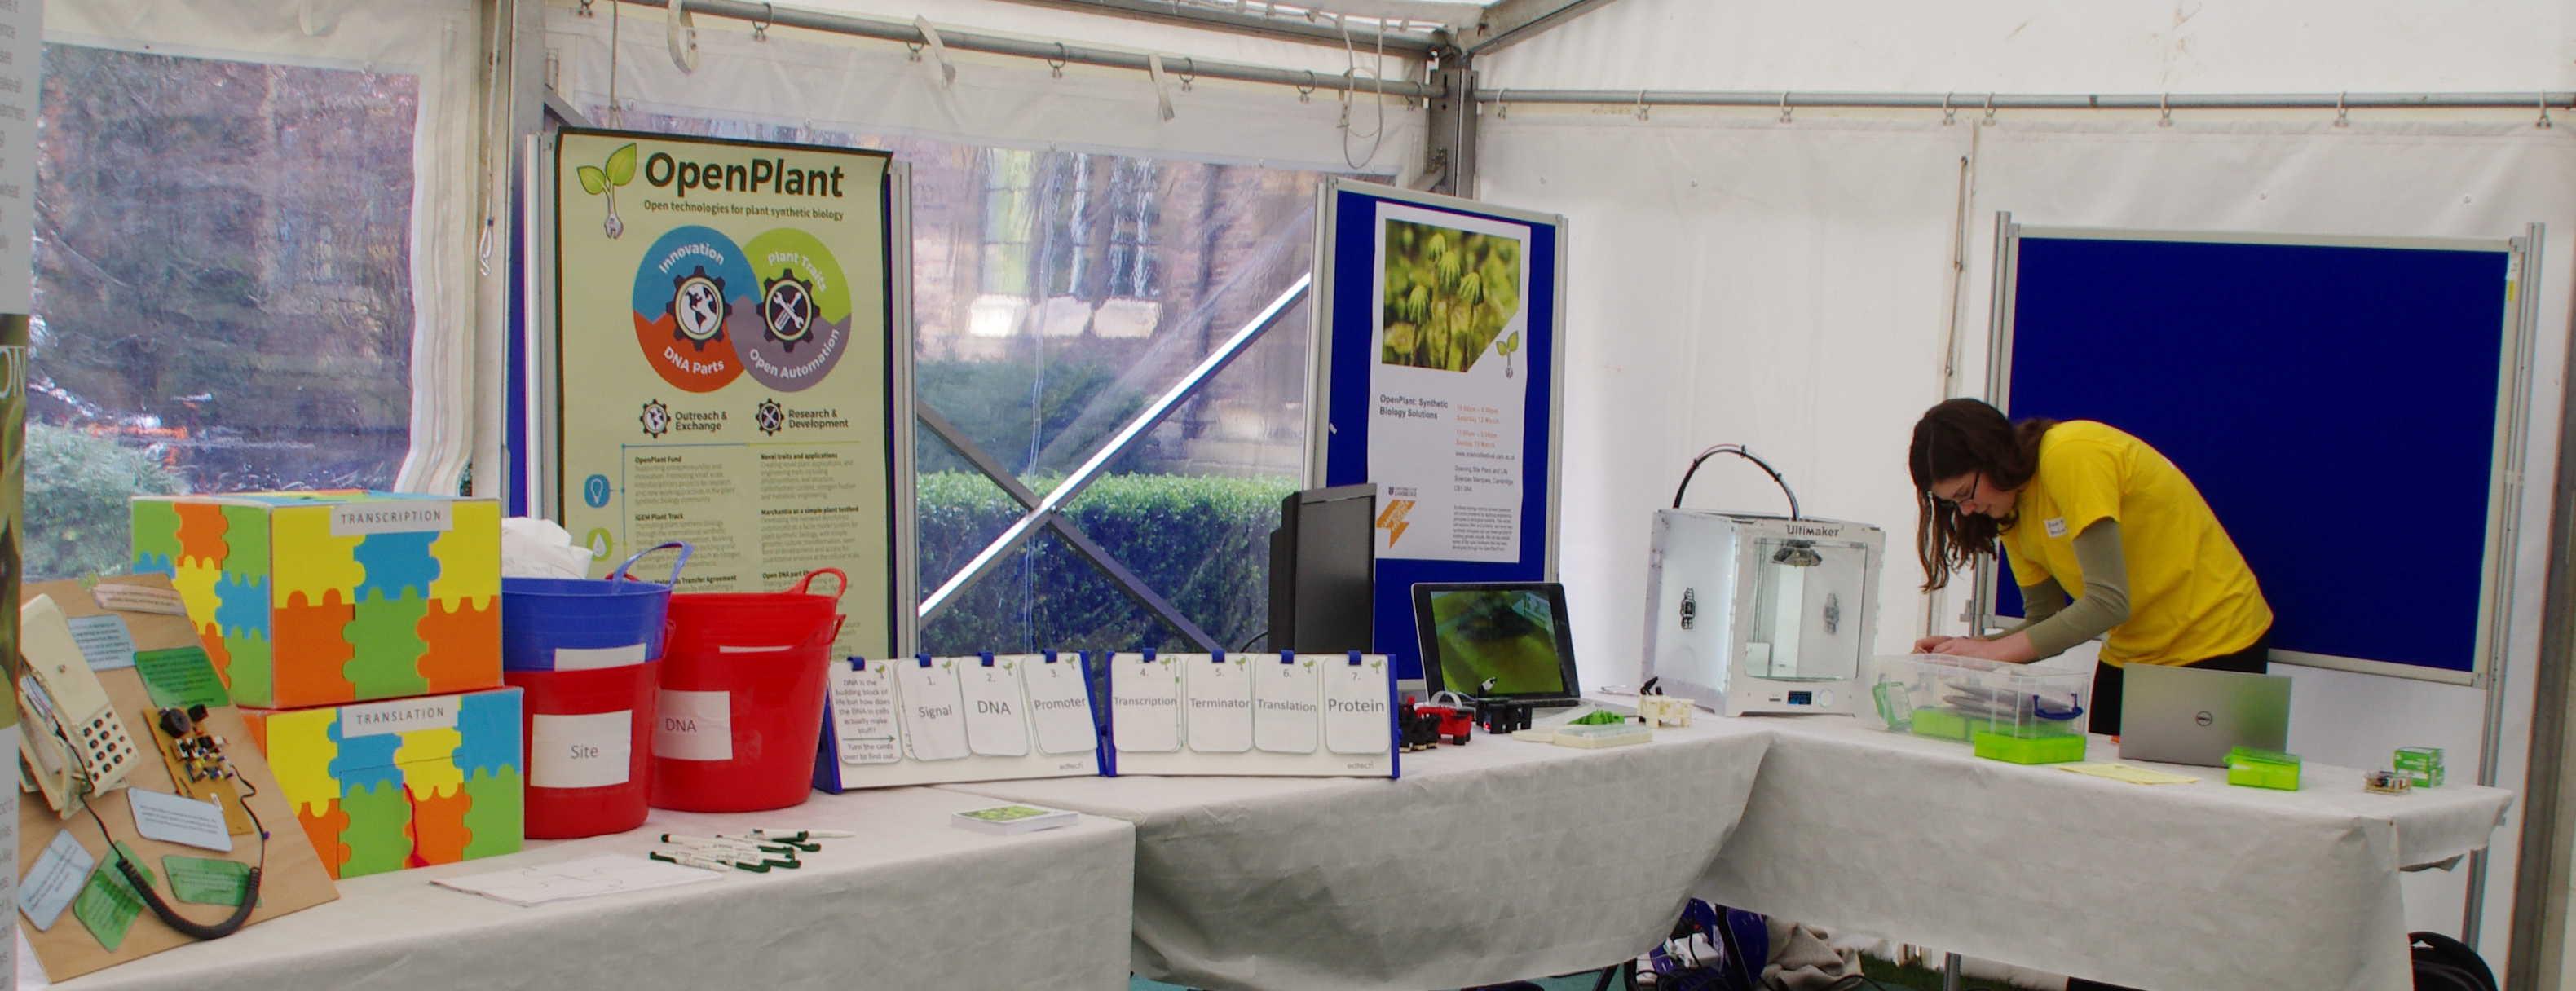 Setting up the 3D printer and open hardware stand at Cambridge Science Festival